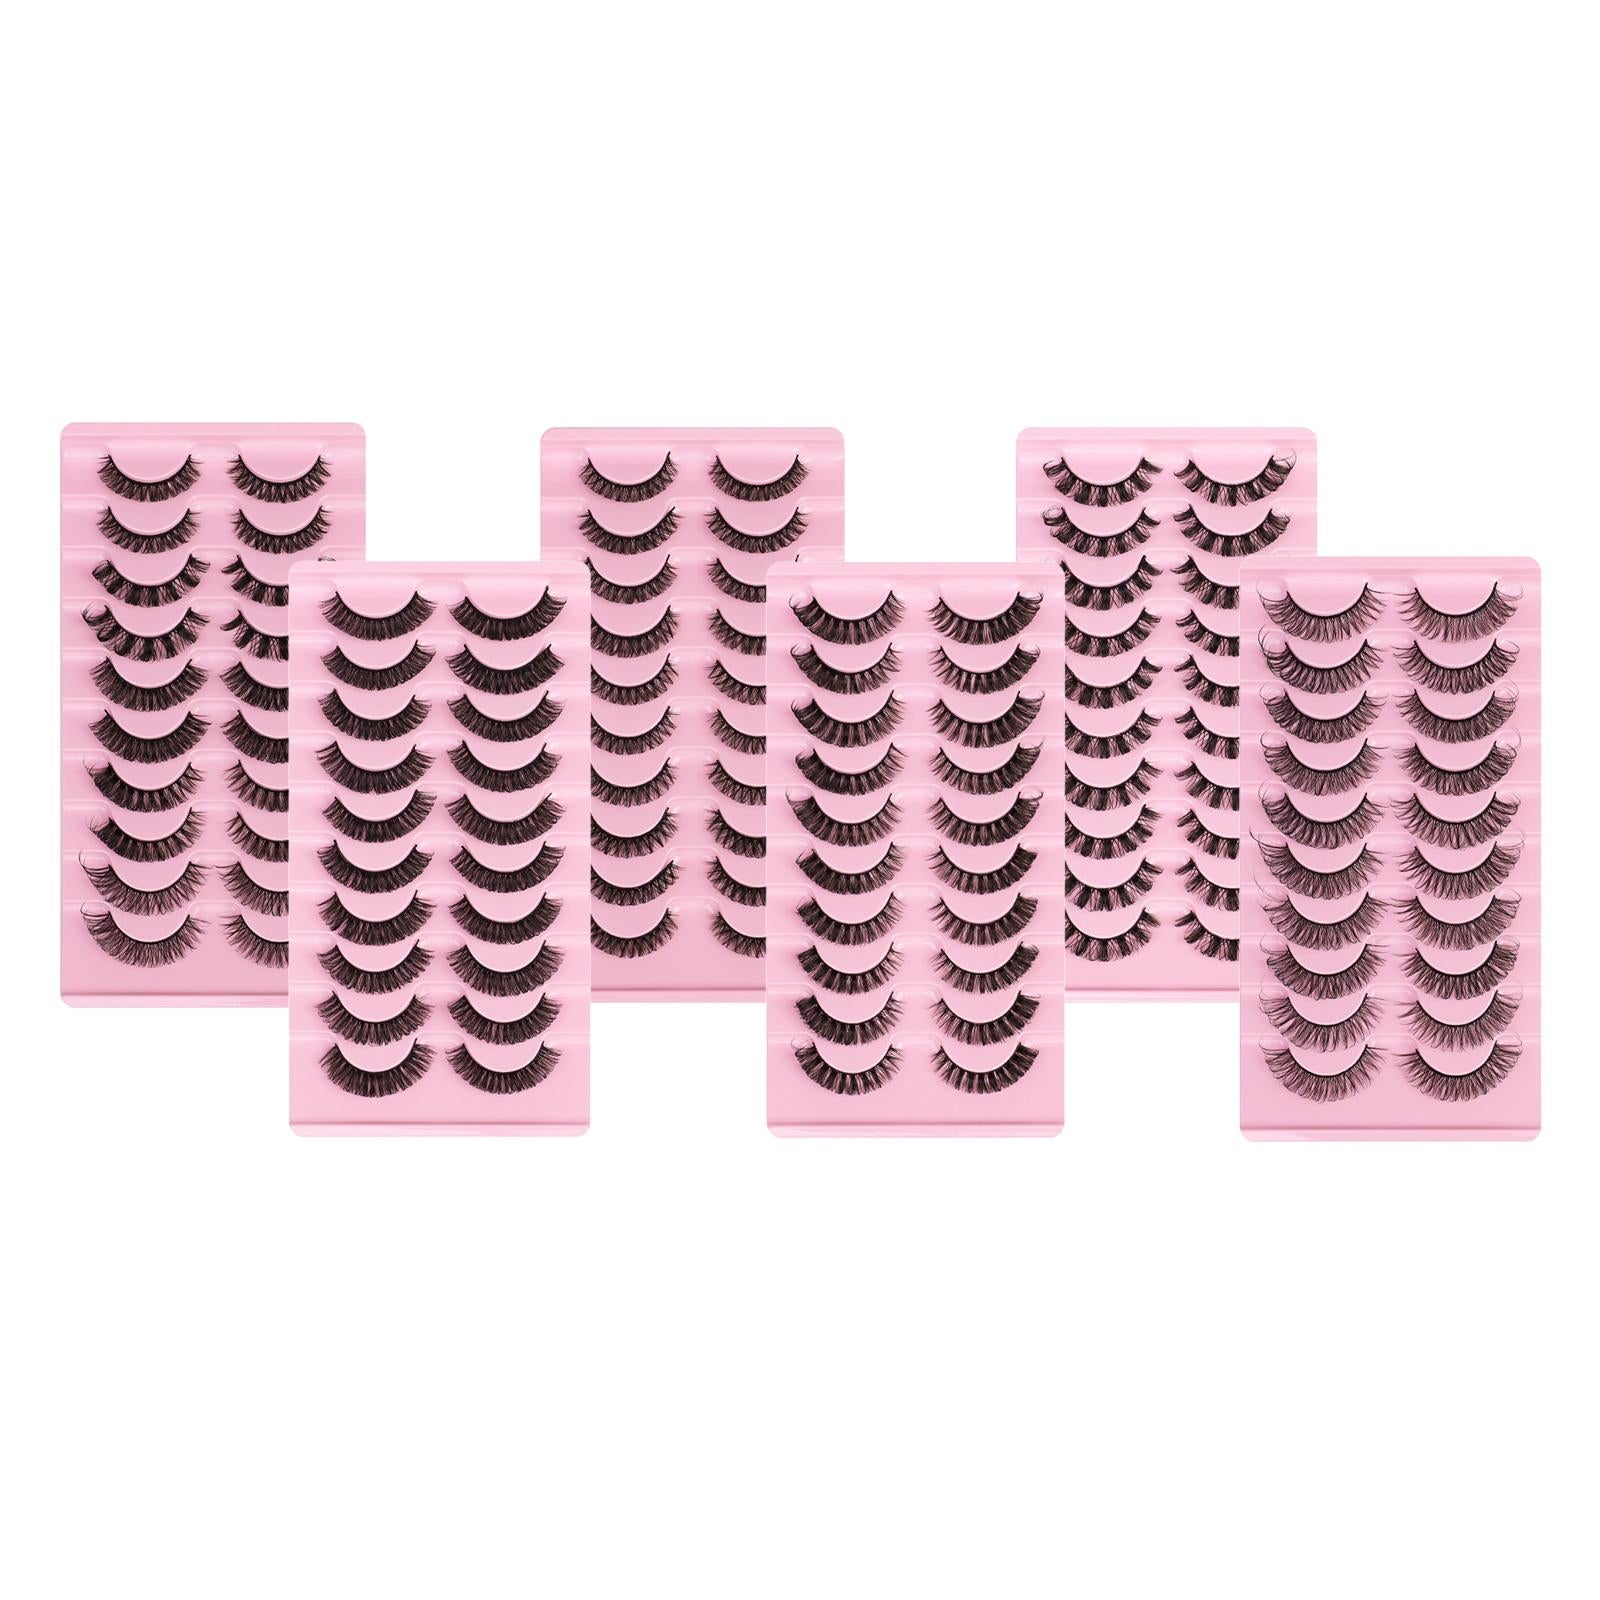 10 Pairs Russian Strip Lashes DD Curl Curly Eye Lashes Handmade A